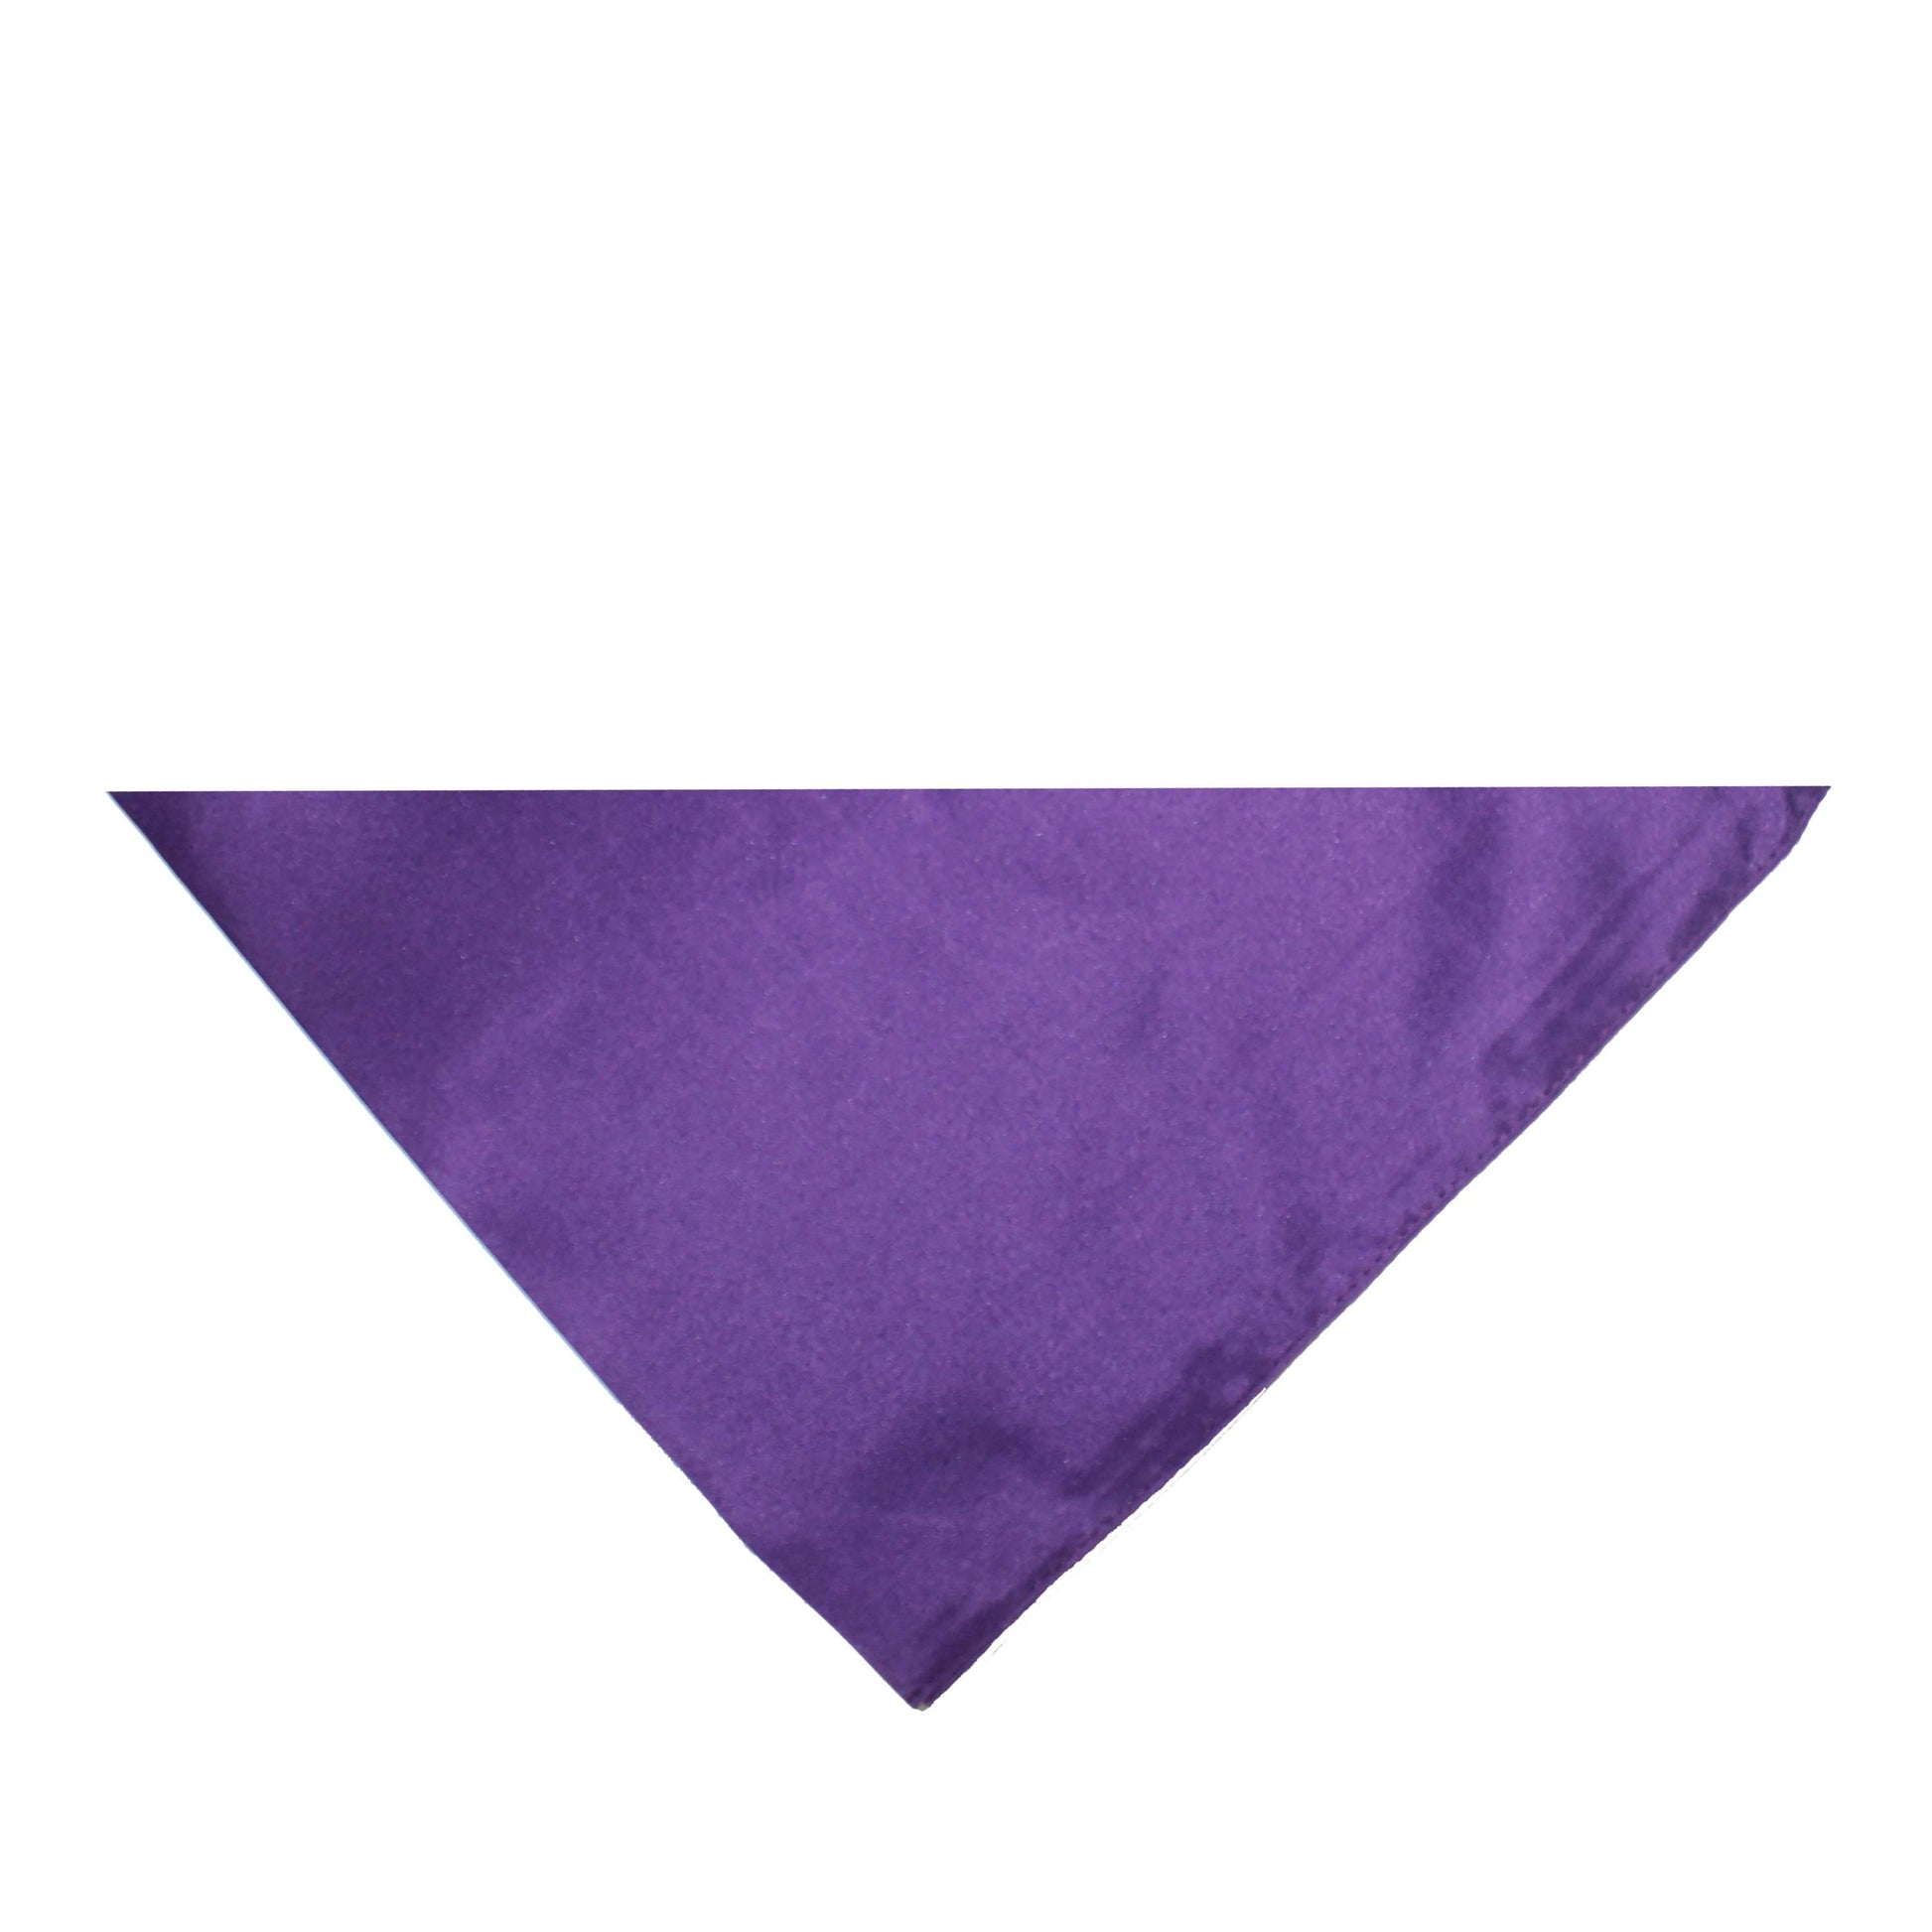 Qraftsy Triangle Solid Cotton Bandanas - 10 Pack - Kerchiefs and Head Scarf